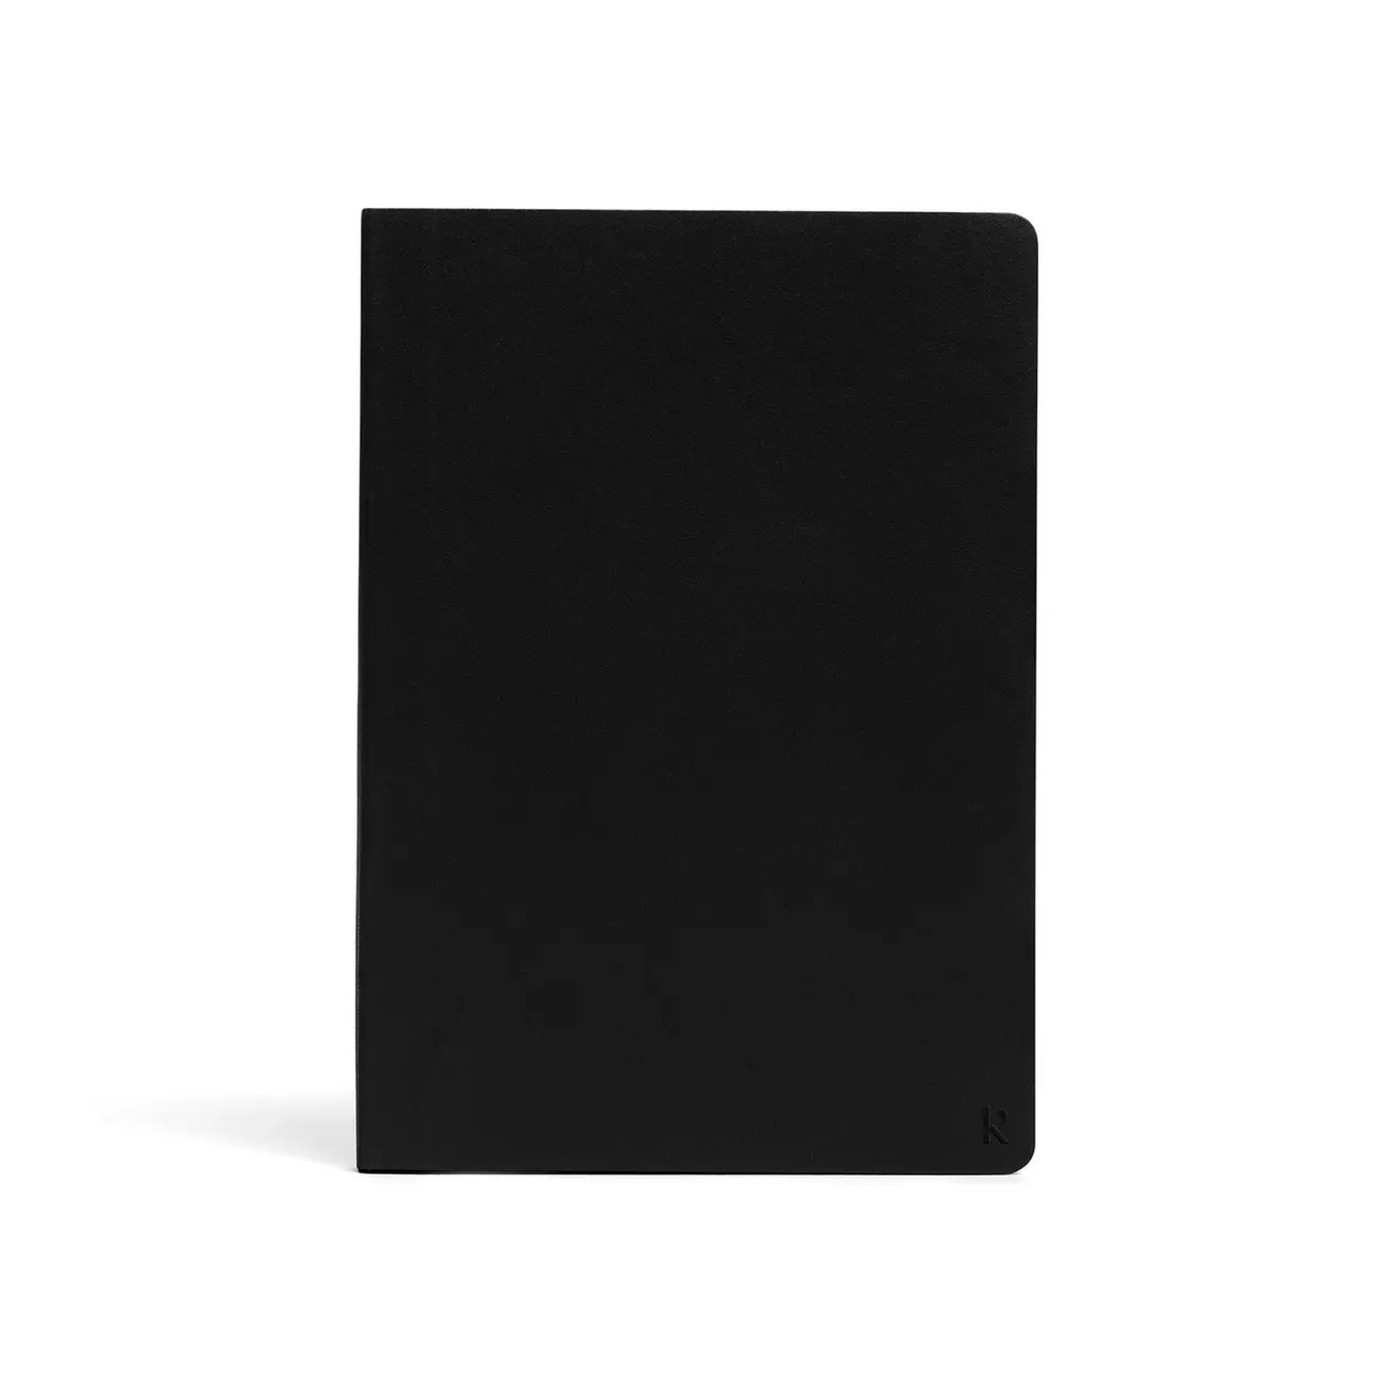 Karst stone paper notebook - soft cover - A5 DOTTED